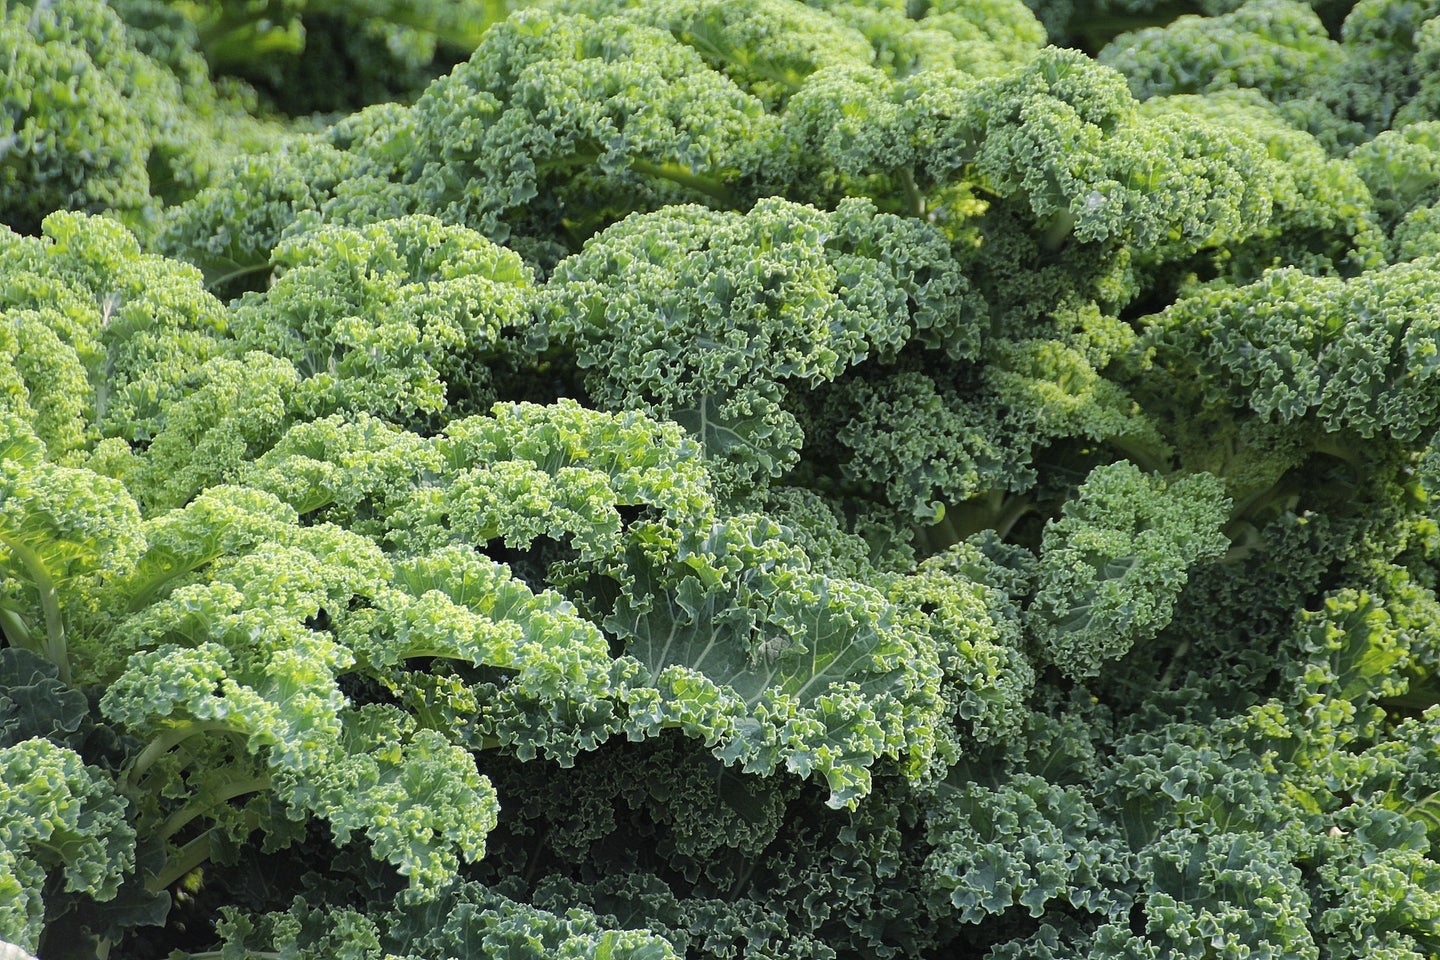 Kale is a polarizing leafy green vegetable.